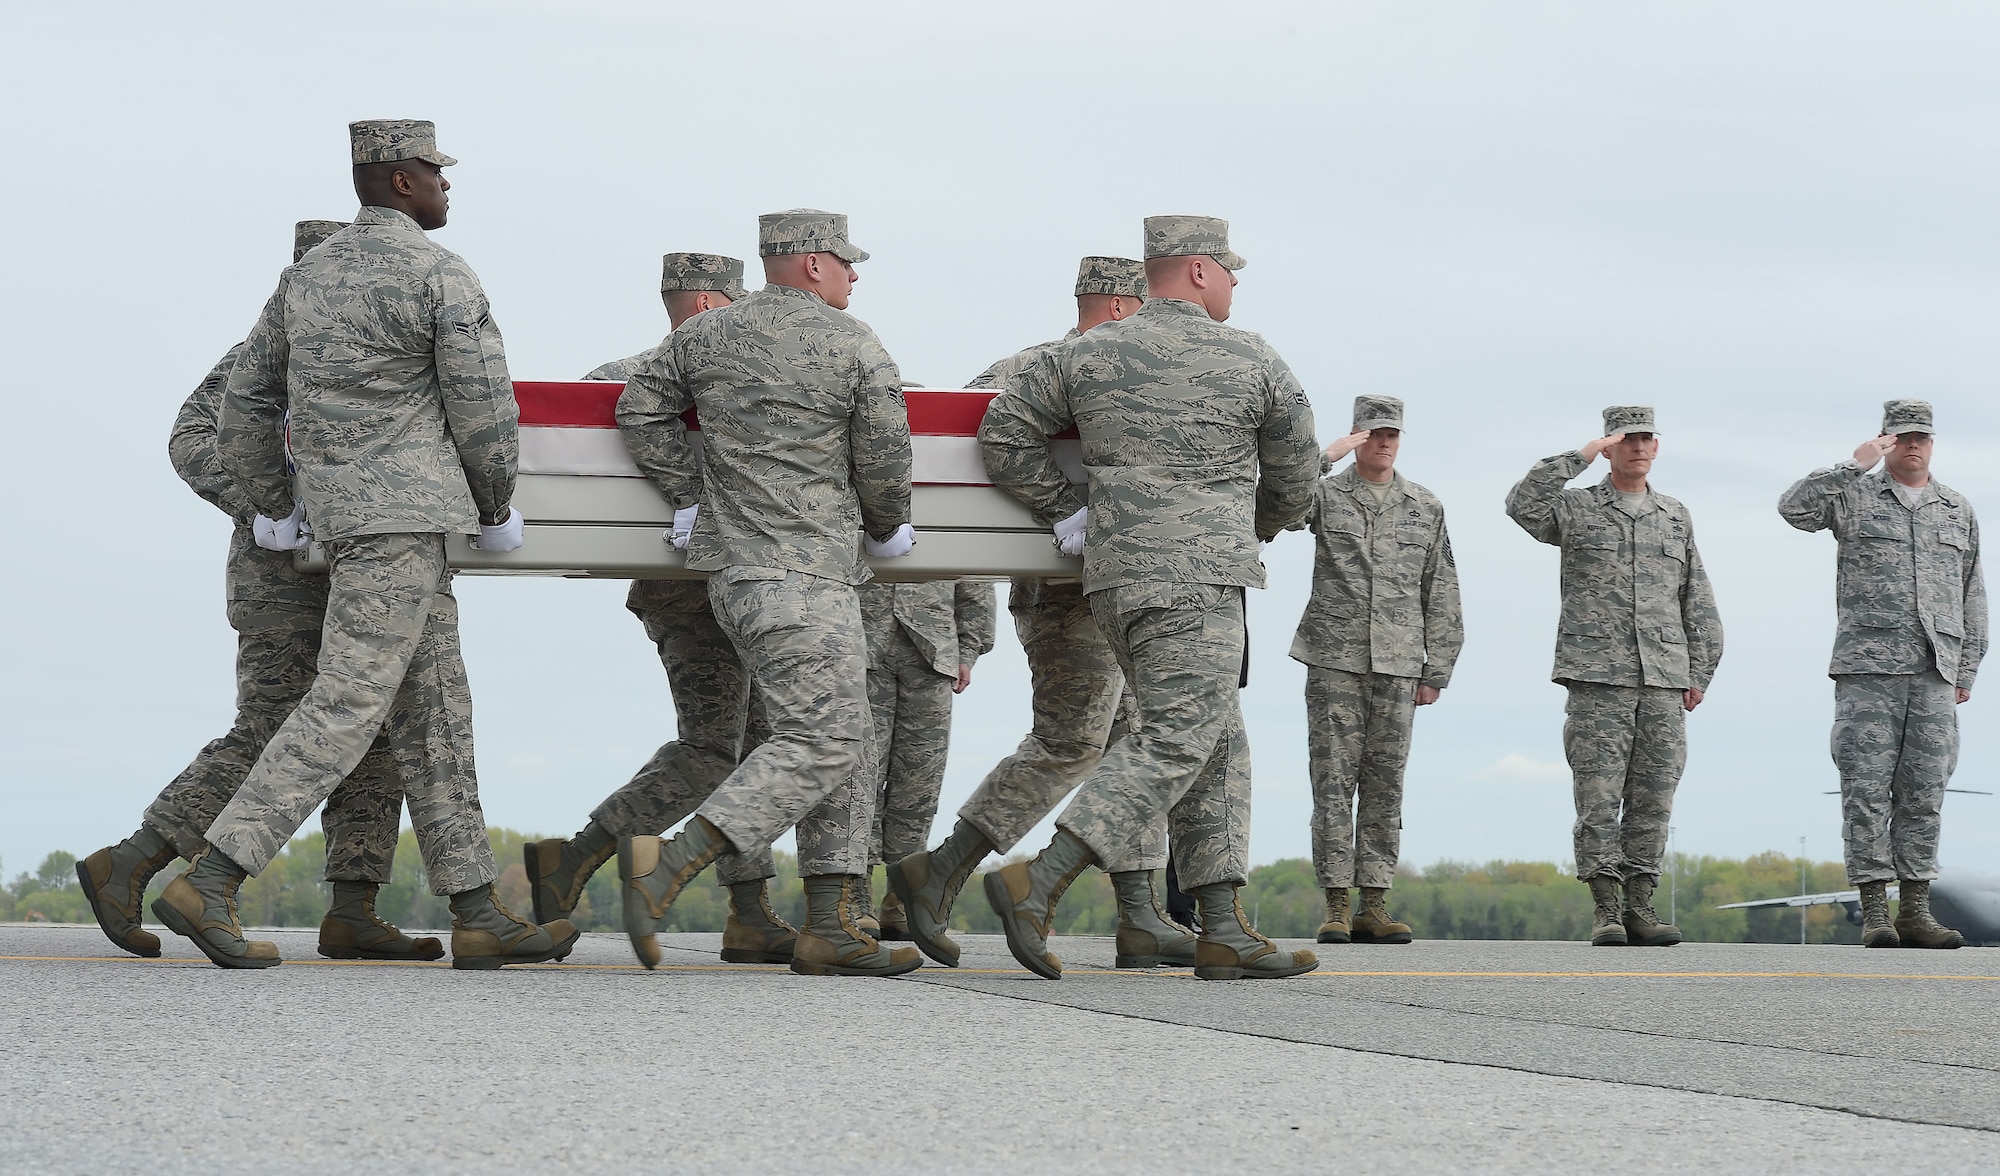 A carry team transfers the remains of Capt. Reid K. Nishizuka, of Kailua, Hawaii, during a dignified transfer, April 30, 2013, at Dover Air Force Base, Del. Nishizuka was assigned to the 427th Reconnsassance Squadron, Beale AFB, Calif. 